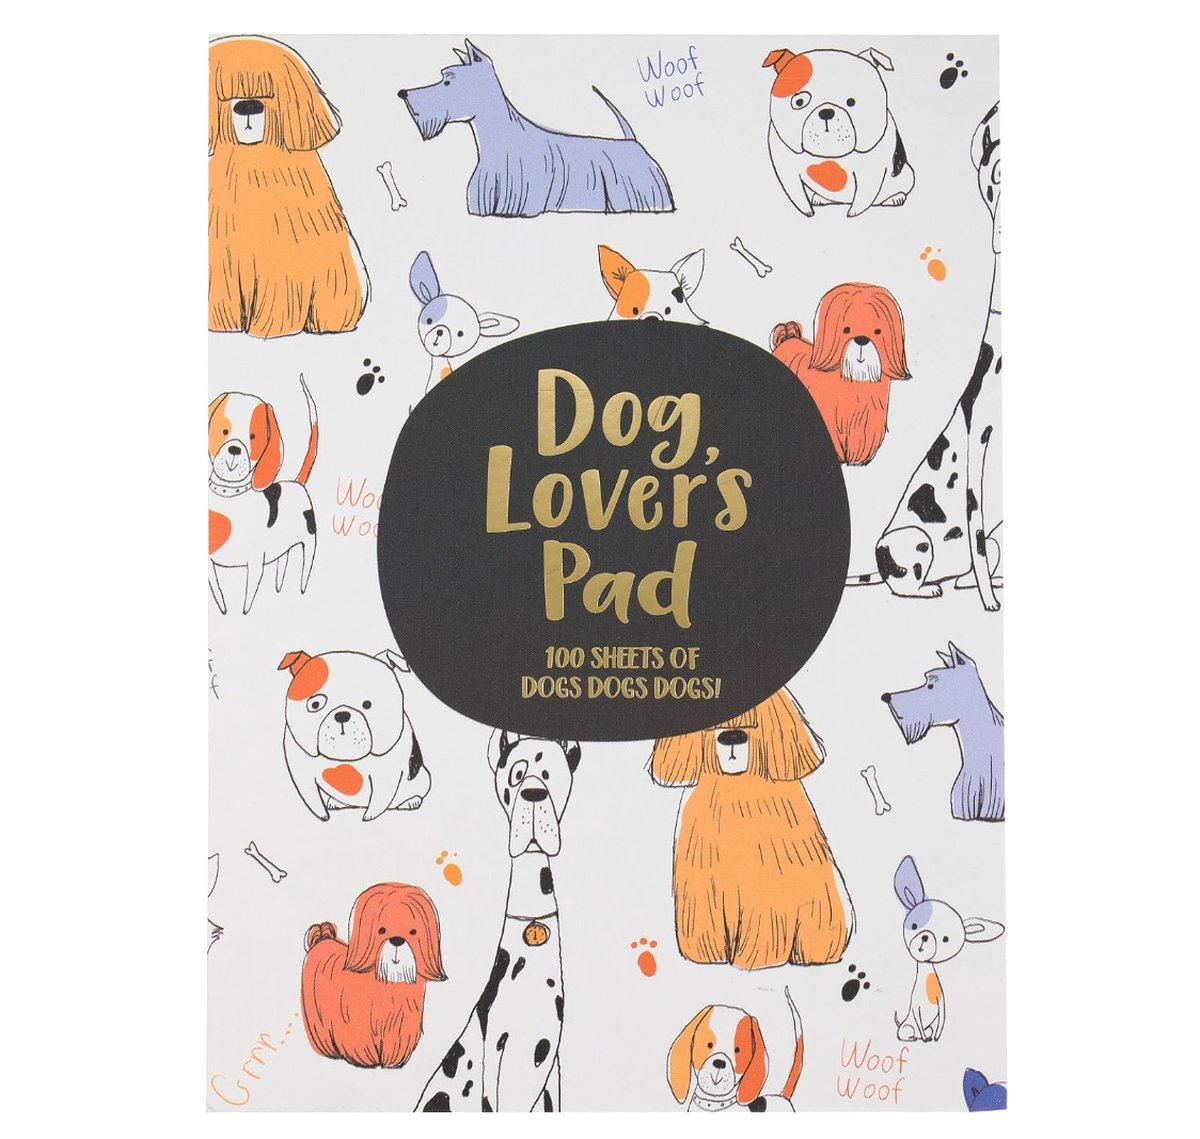 Eccolo World Traveler Dog Lover's Pad 100 Sheet memo notepad with gold stamped full color cover 13x18cm